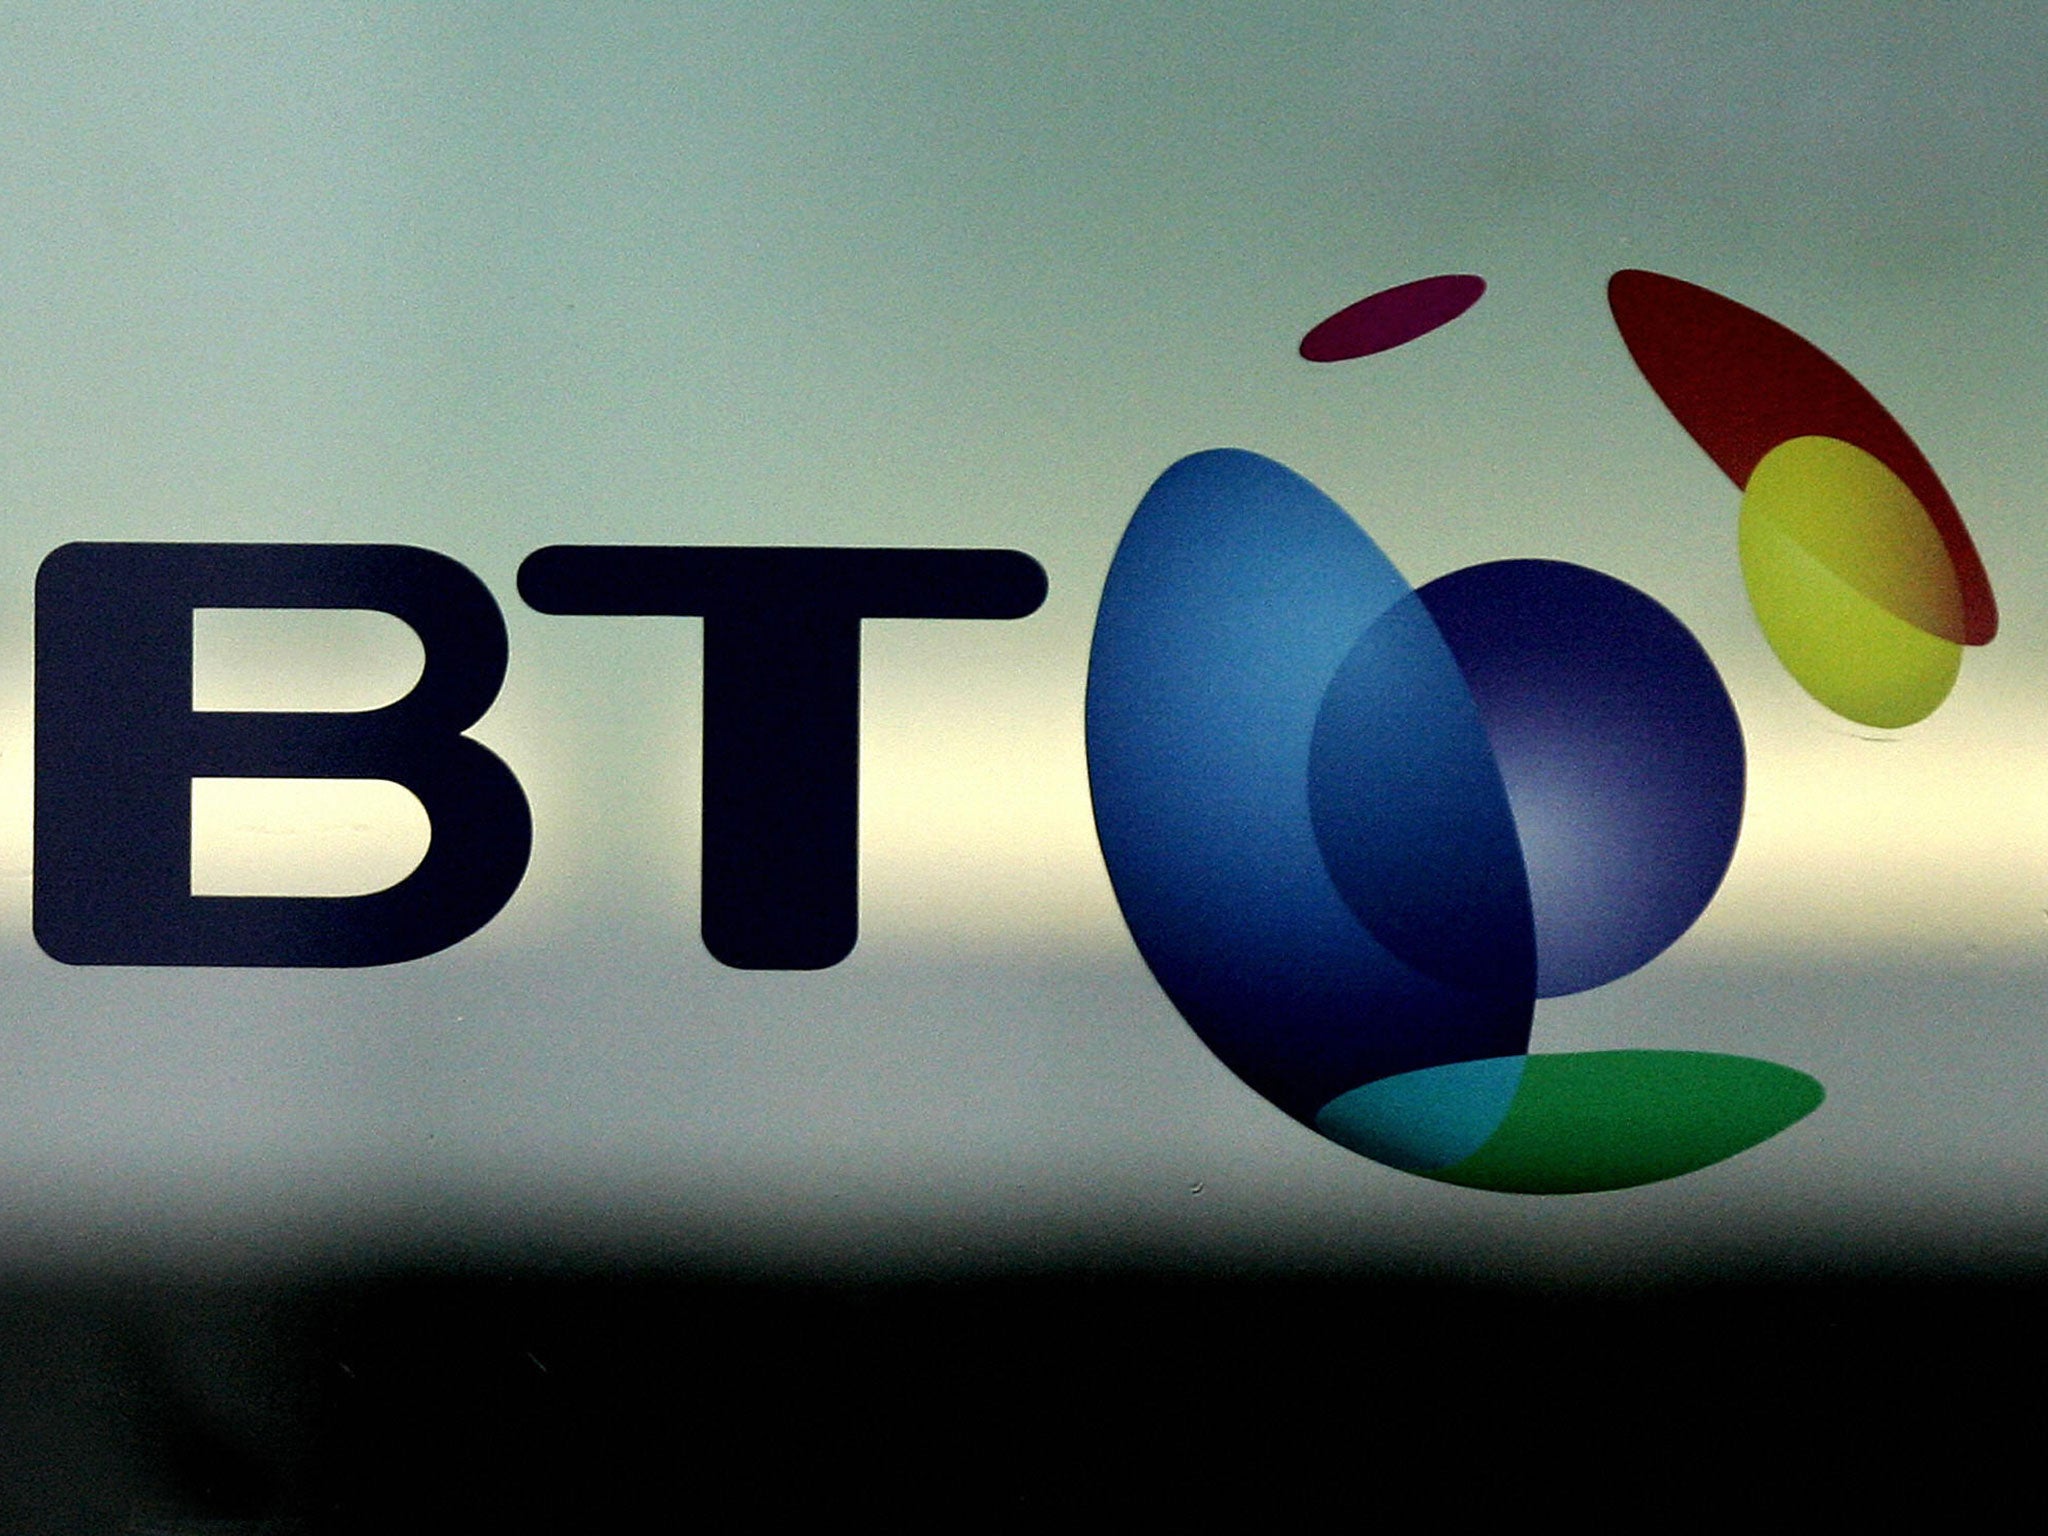 An accounting scandal in BT's Italian business wiped almost £8bn off the company’s value on Tuesday